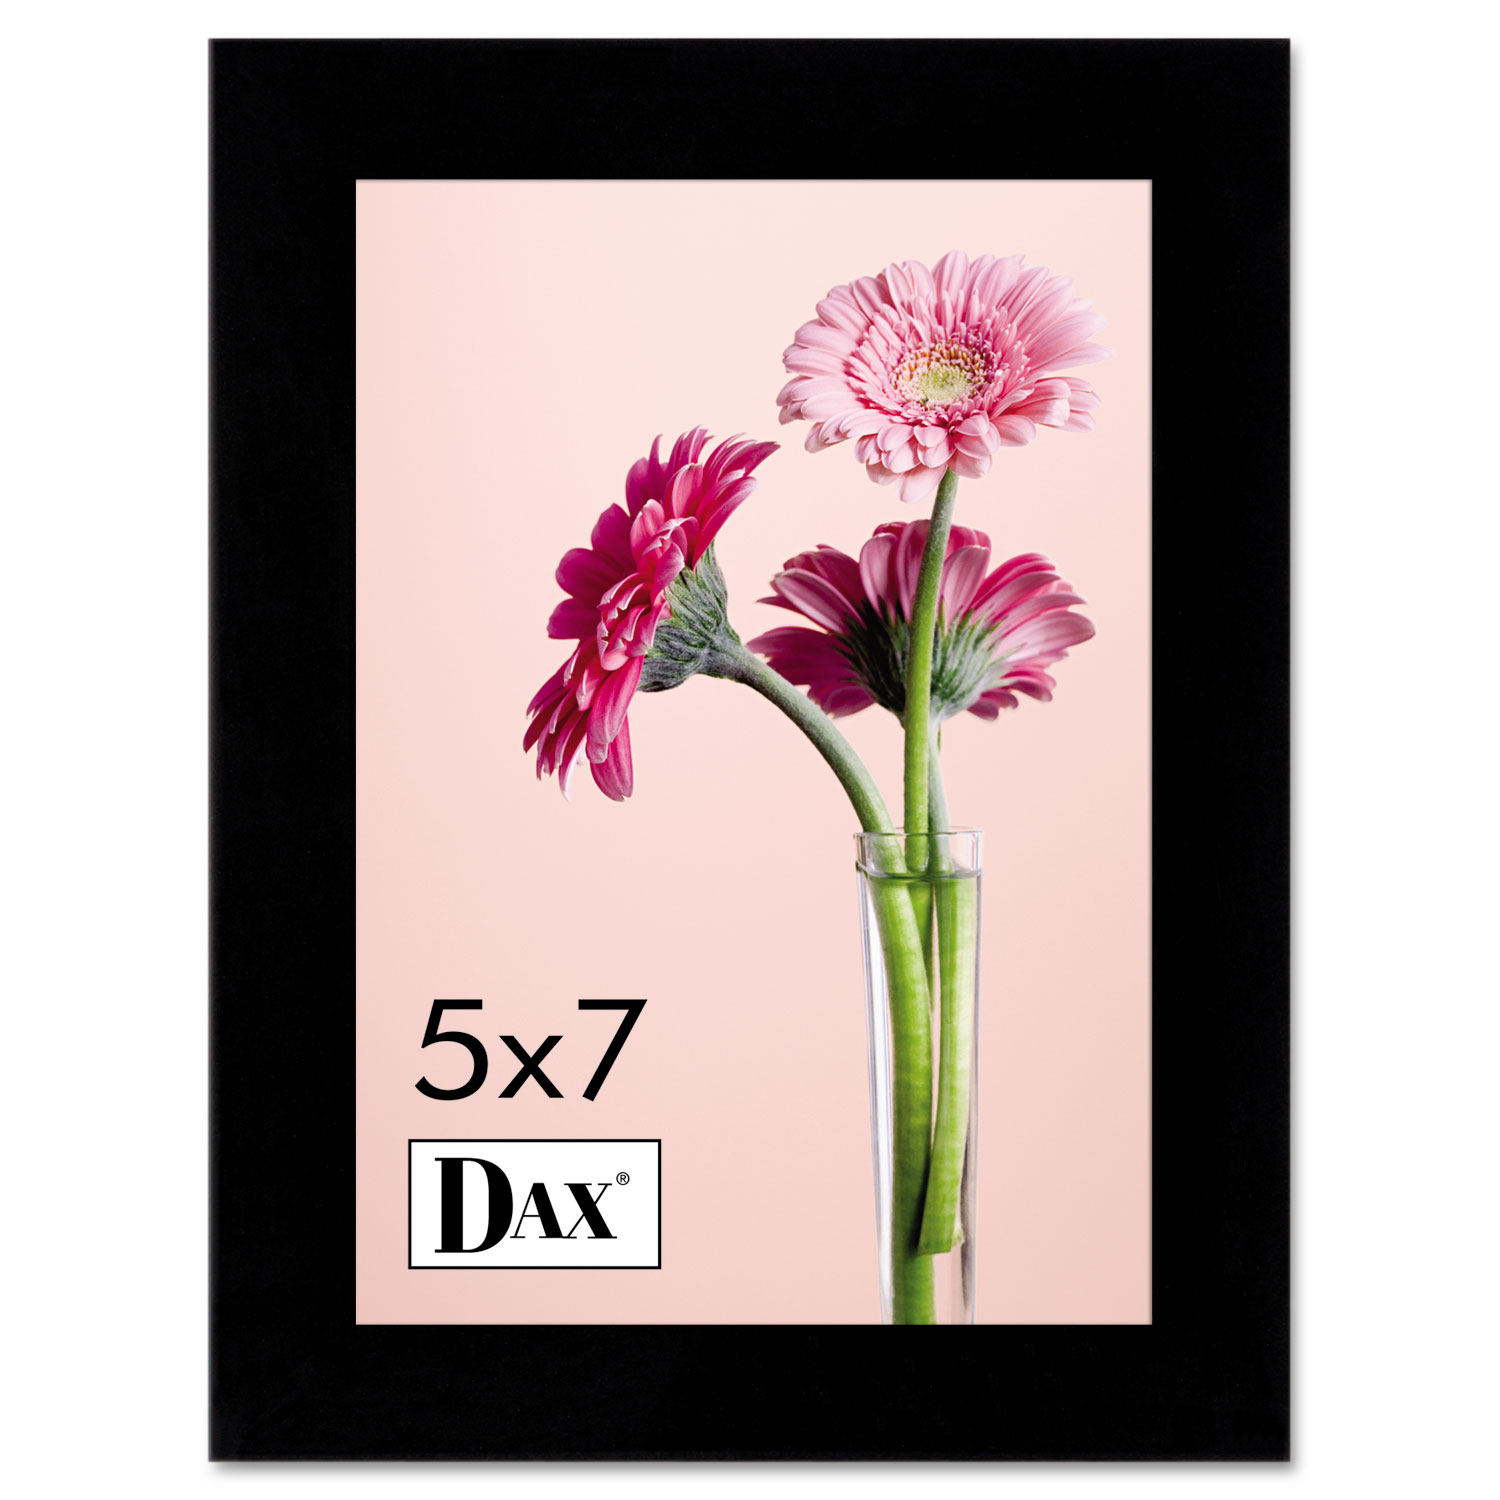  DAX 1826H3T Solid Wood Photo/Picture Frame, Easel Back, 5 x 7, Black (DAX1826H3T) 